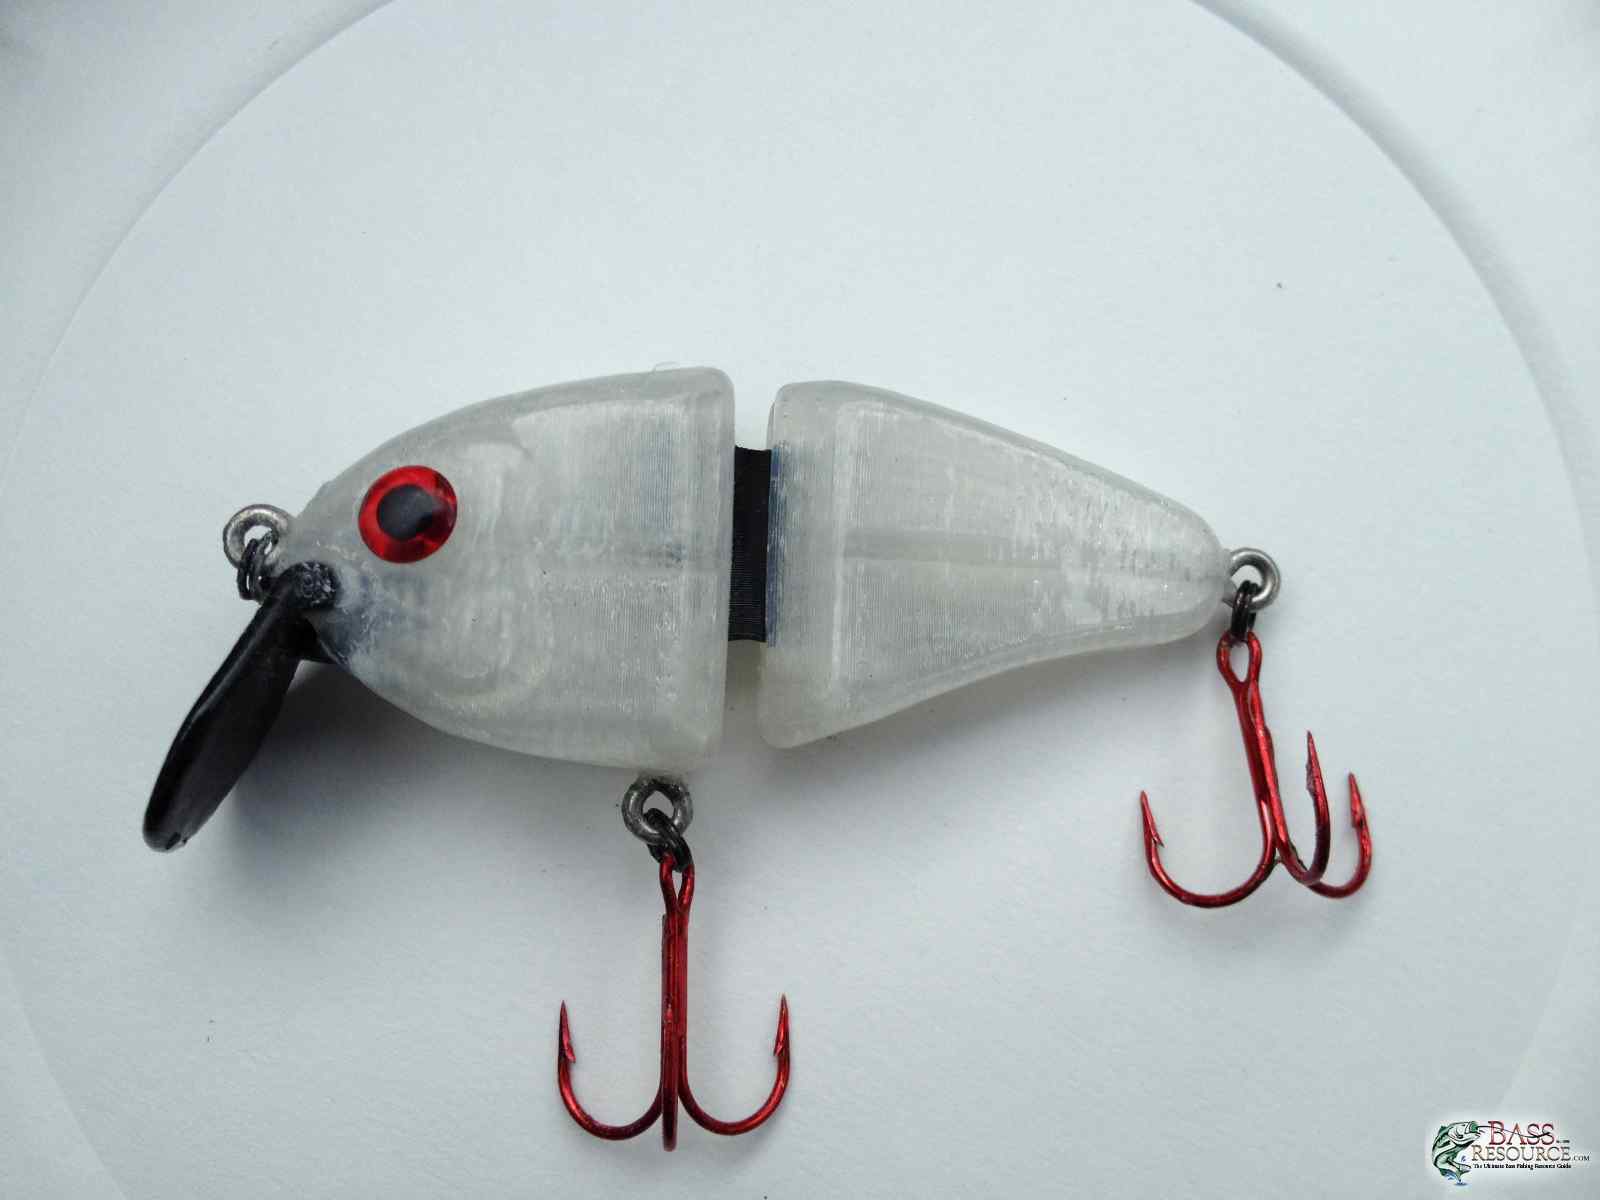 3d printed fishing lure jointed crankbait - Fishing Albums - Bass